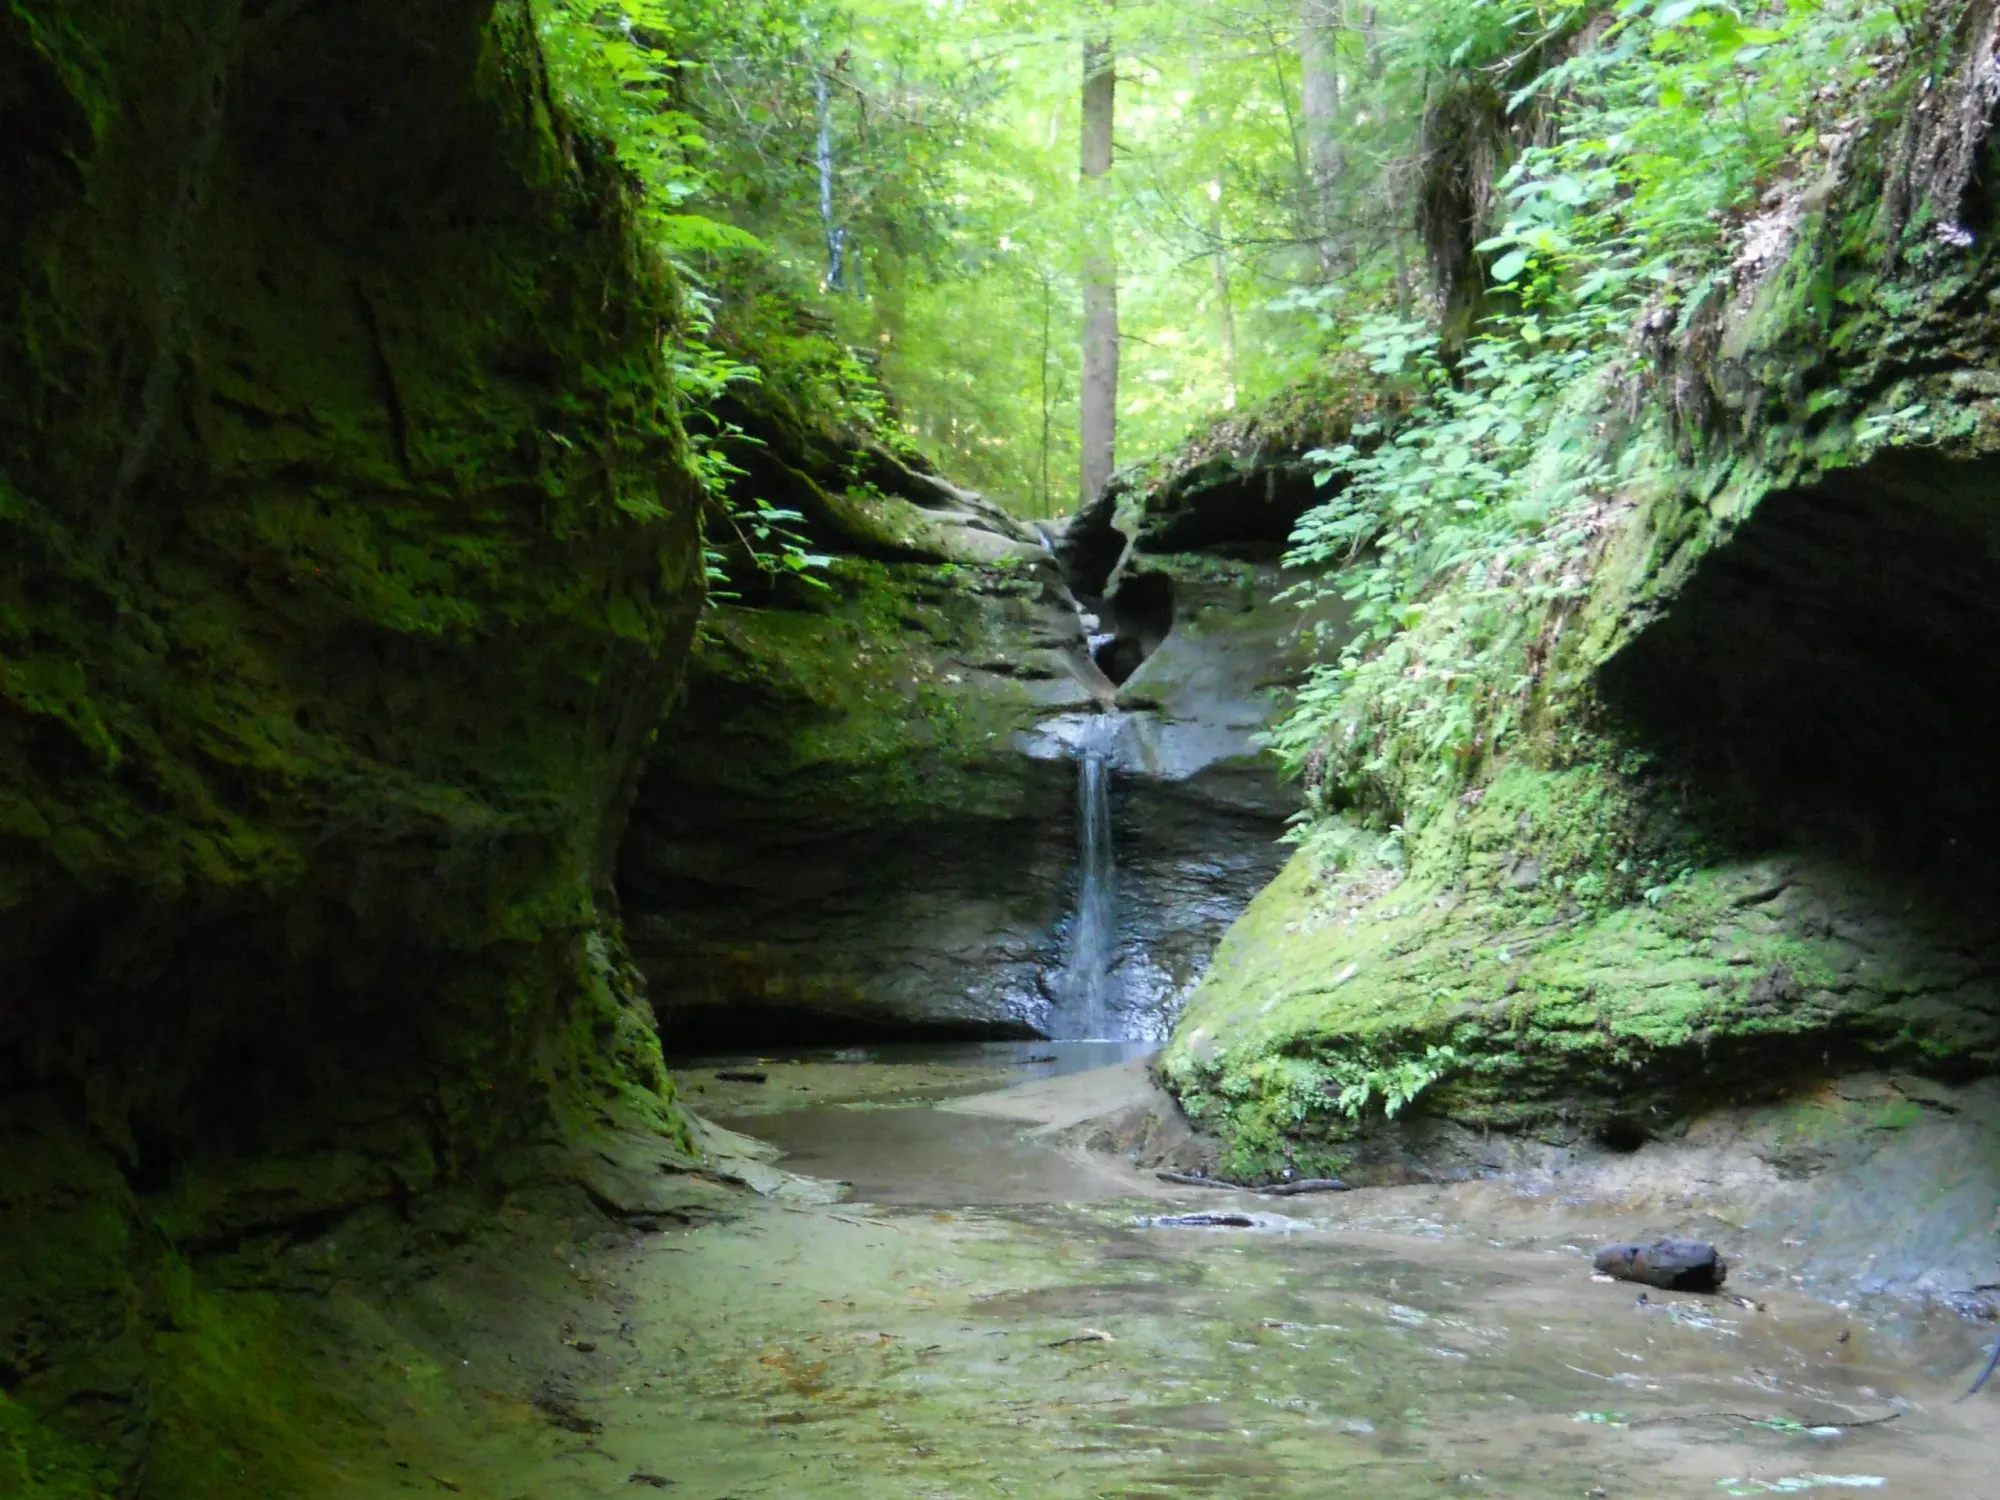 Experience Parks on the Air (POTA) at the Scenic Indiana's Turkey Run State Park